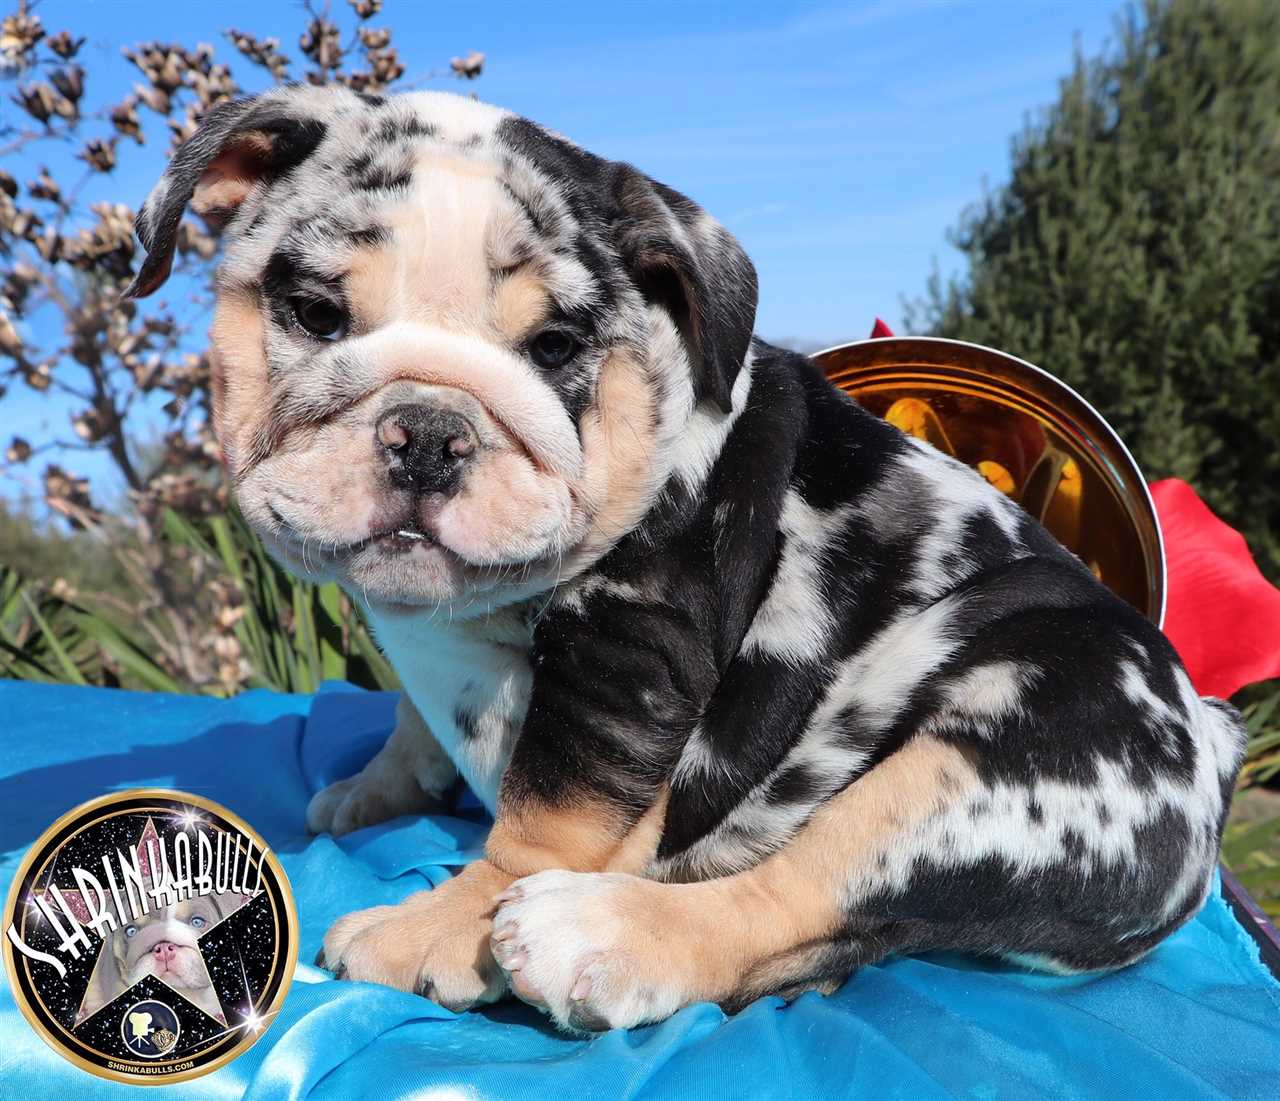 The Popularity and Controversy Surrounding the Chocolate Merle Bulldog